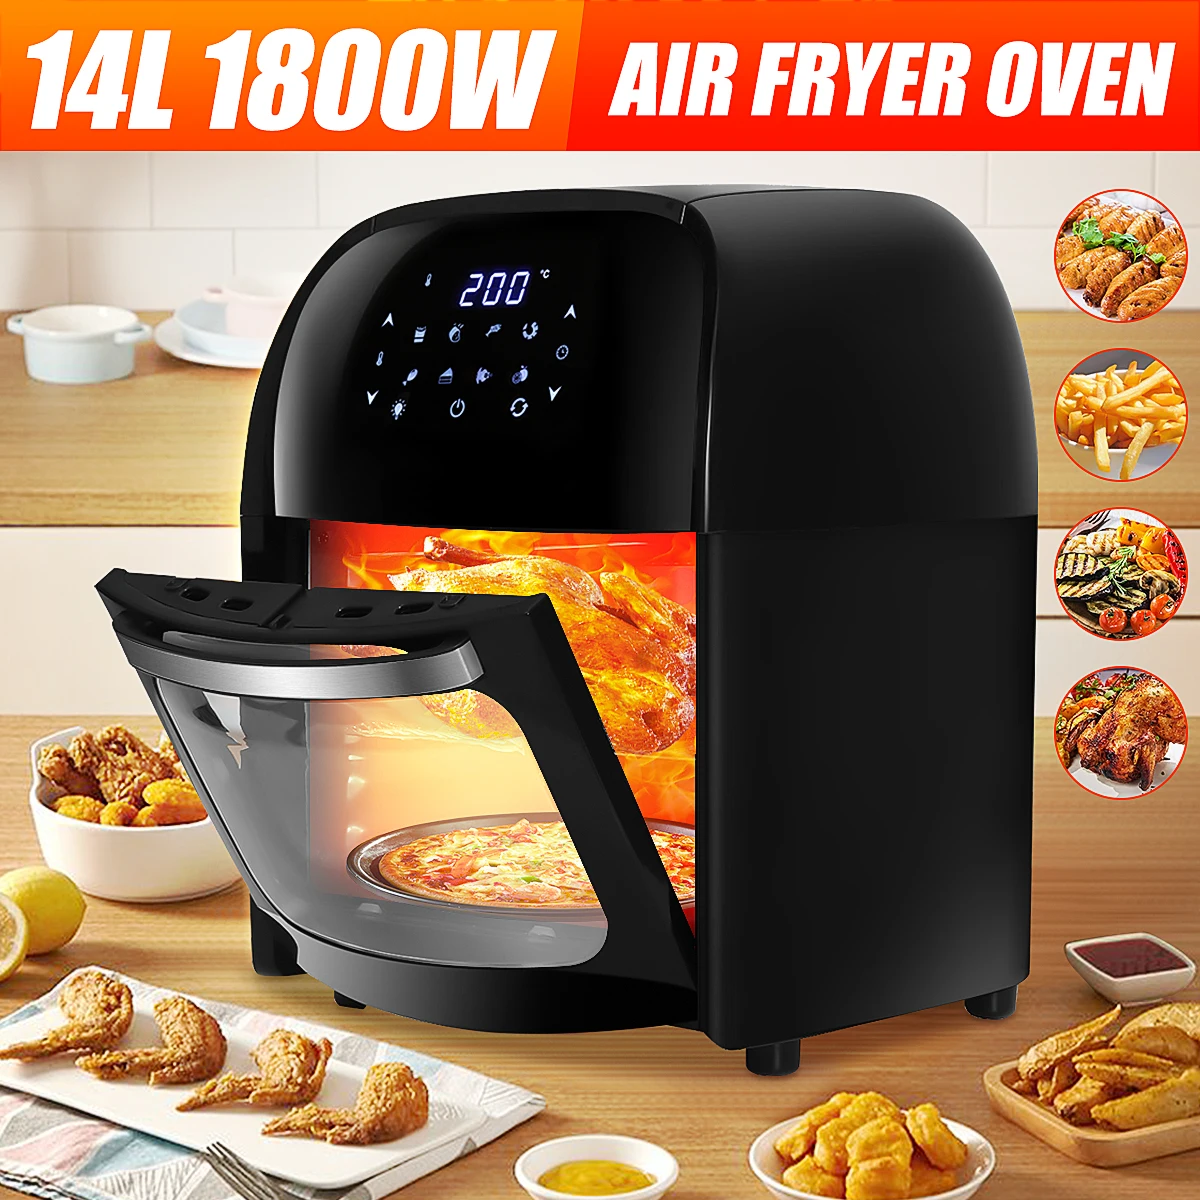 

14L 1800W Oil Free Air Fryer Oven Toaster Rotisserie Dehydrator Countertop Oven With LED Digital Touch Screen Electric Deep CF11